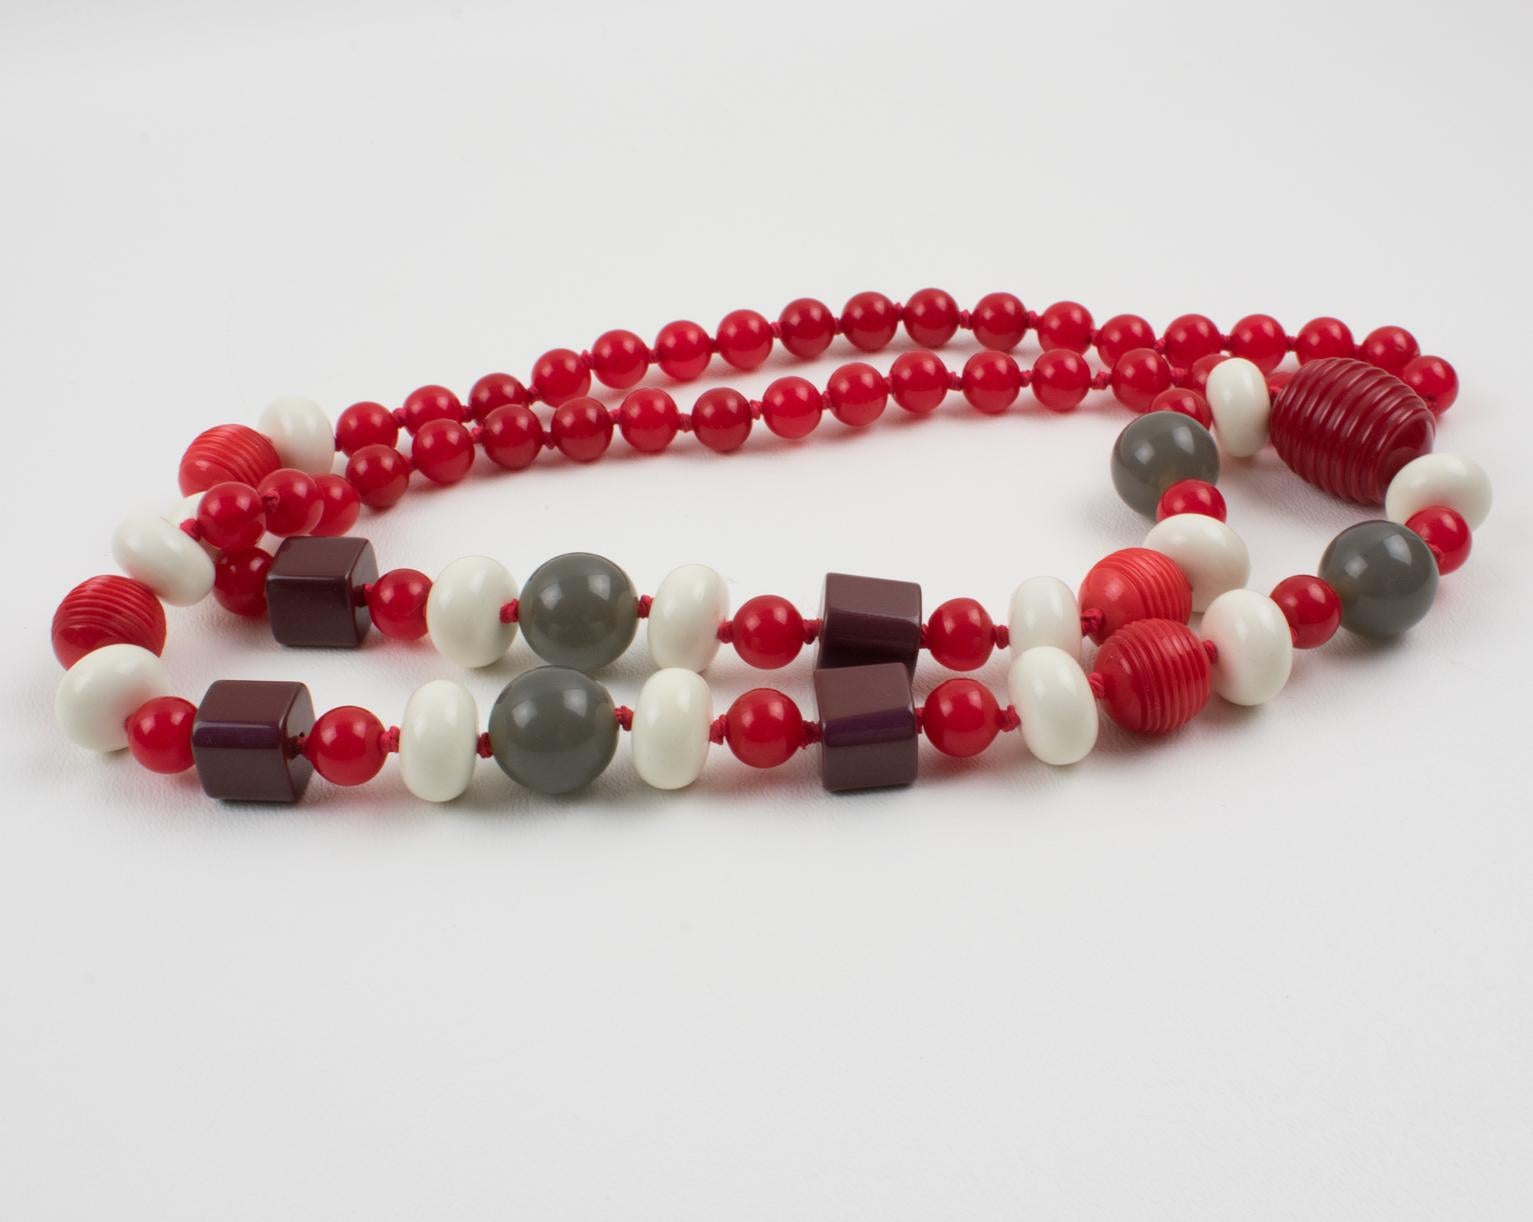 Bakelite and Lucite Long Necklace Gray, White, and Red Colors For Sale 3